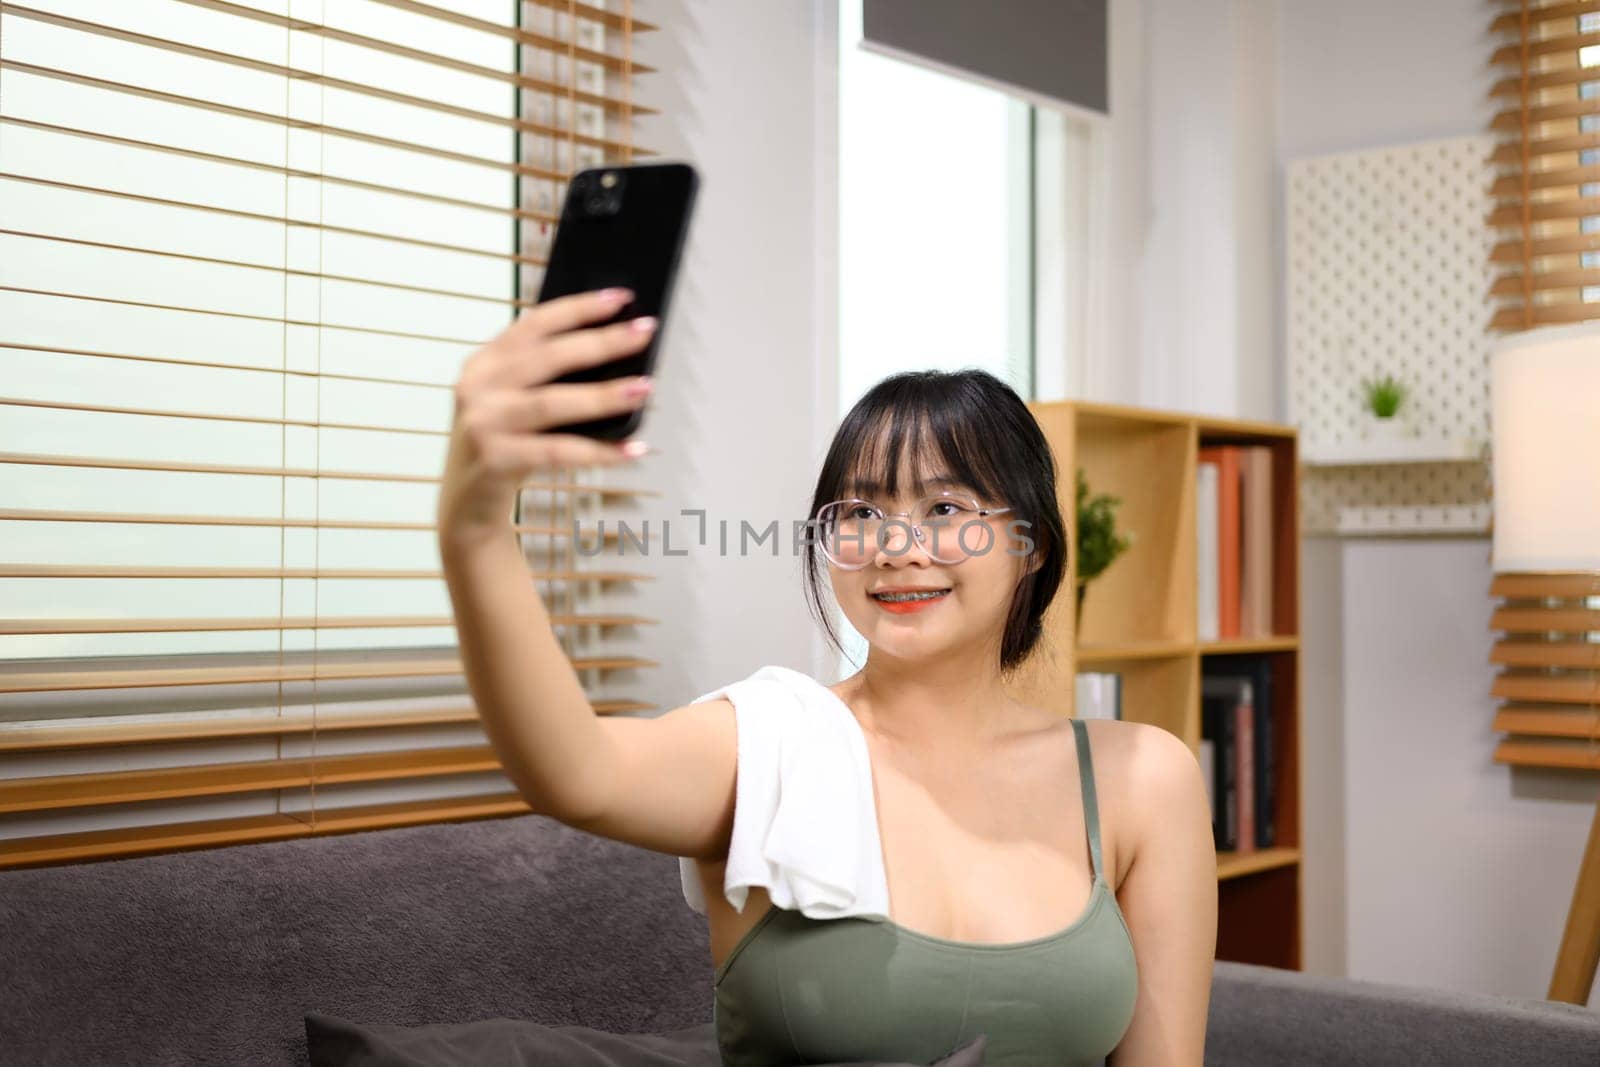 Cute young woman taking selfie with smartphone after finishing home workout.